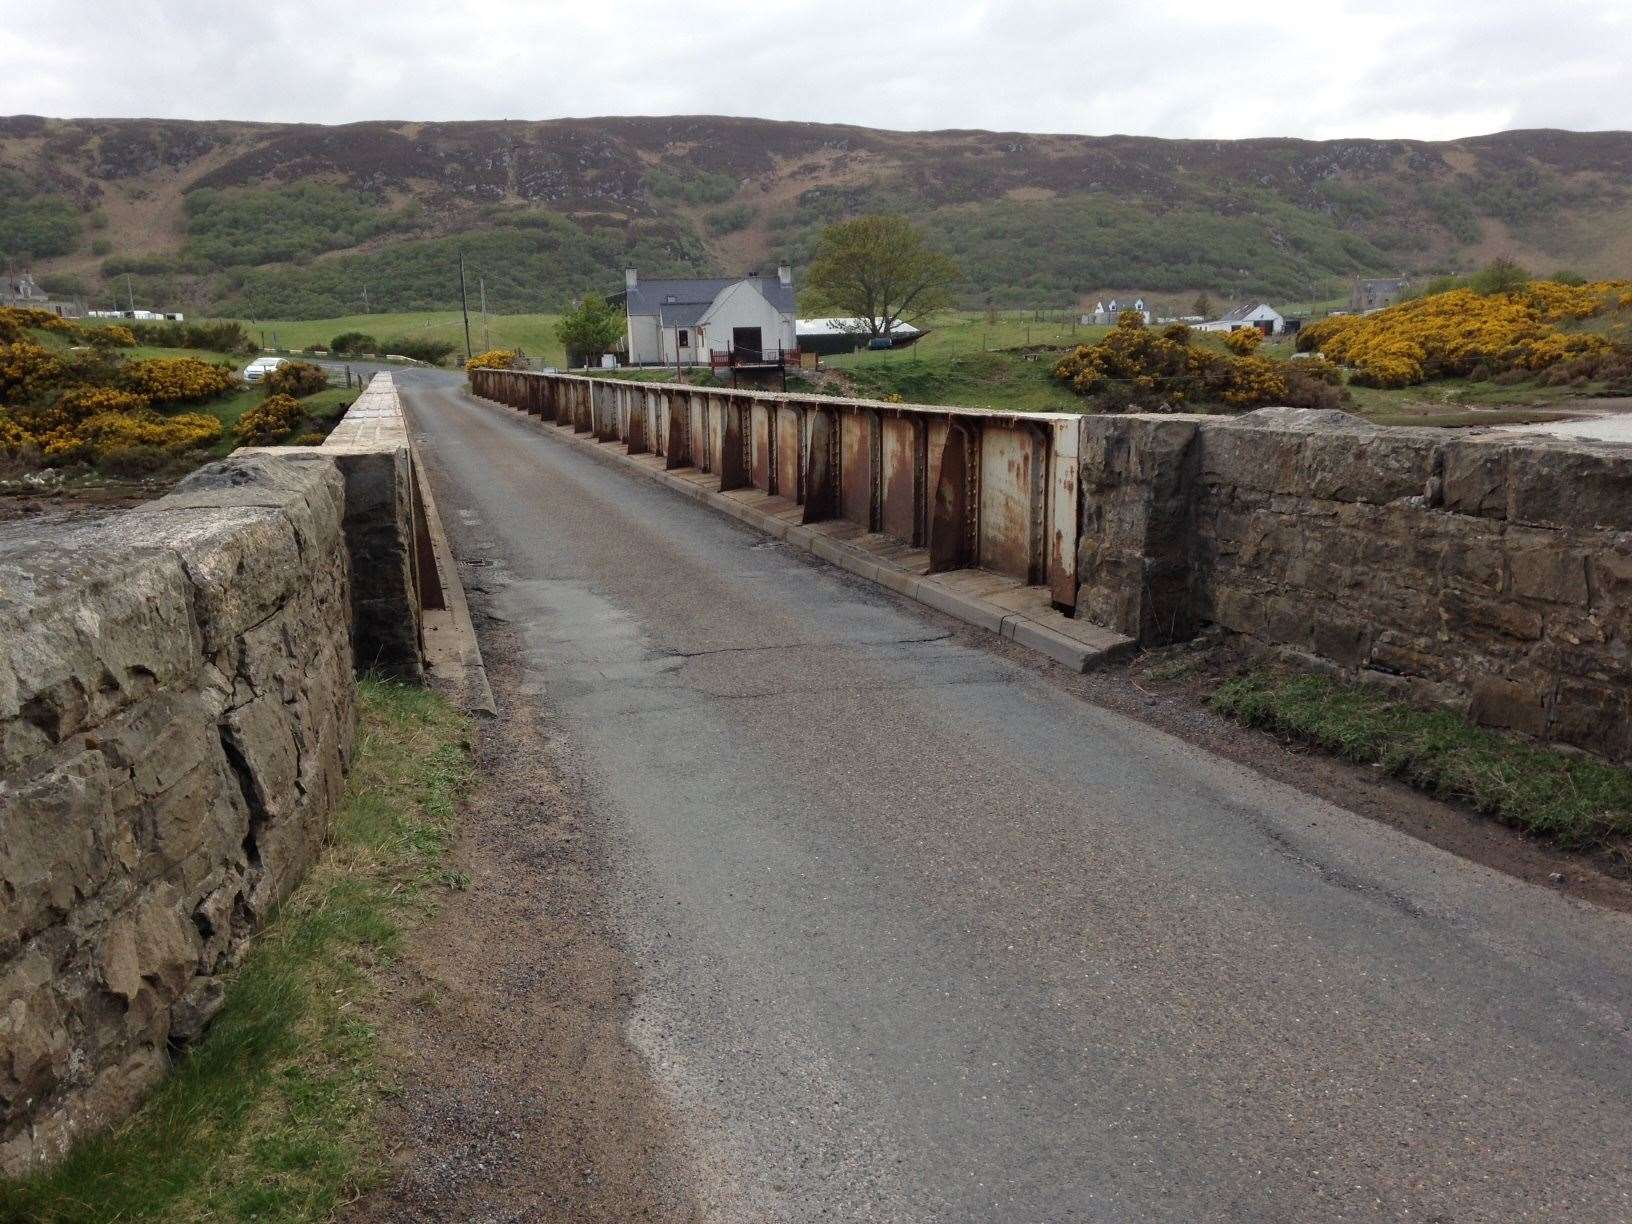 A recent picture of Naver bridge in which the badly rusted ironwork can clearly be seen. Repairs were last carried out to the bridge in 1987.